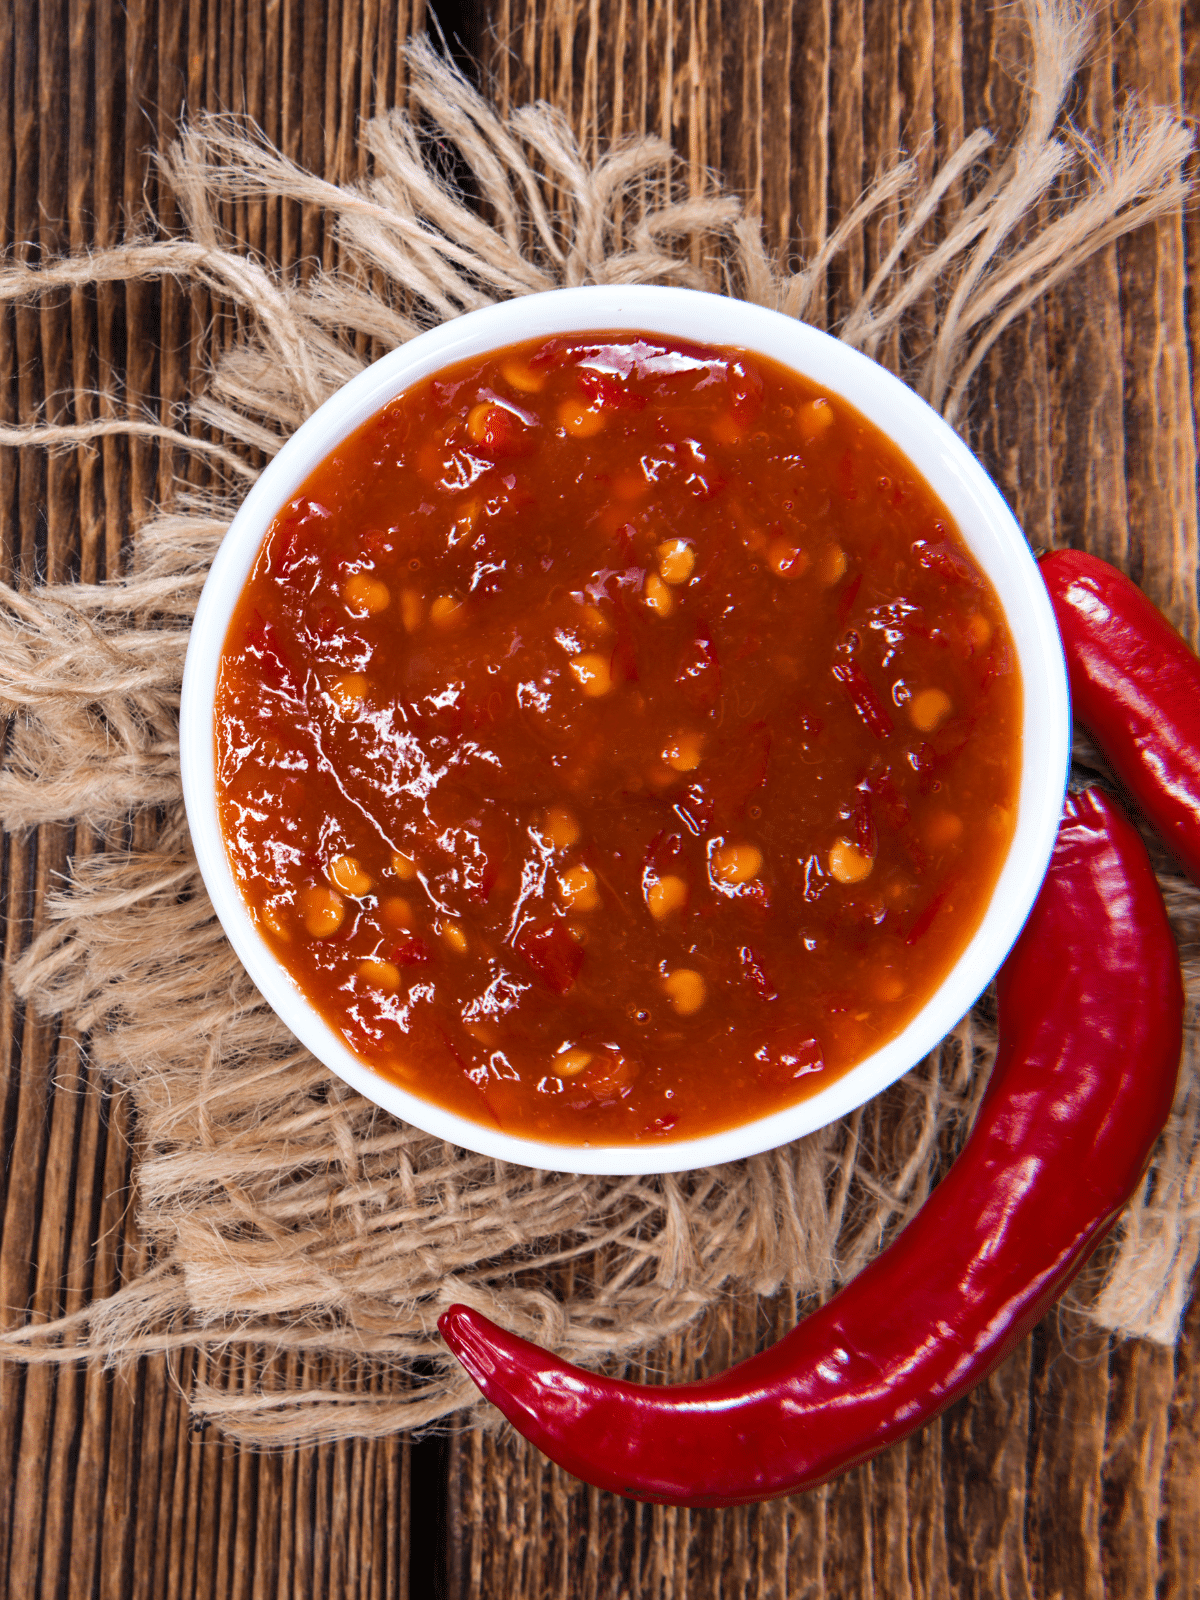 Chili sauce in a bowl on a wooden table.